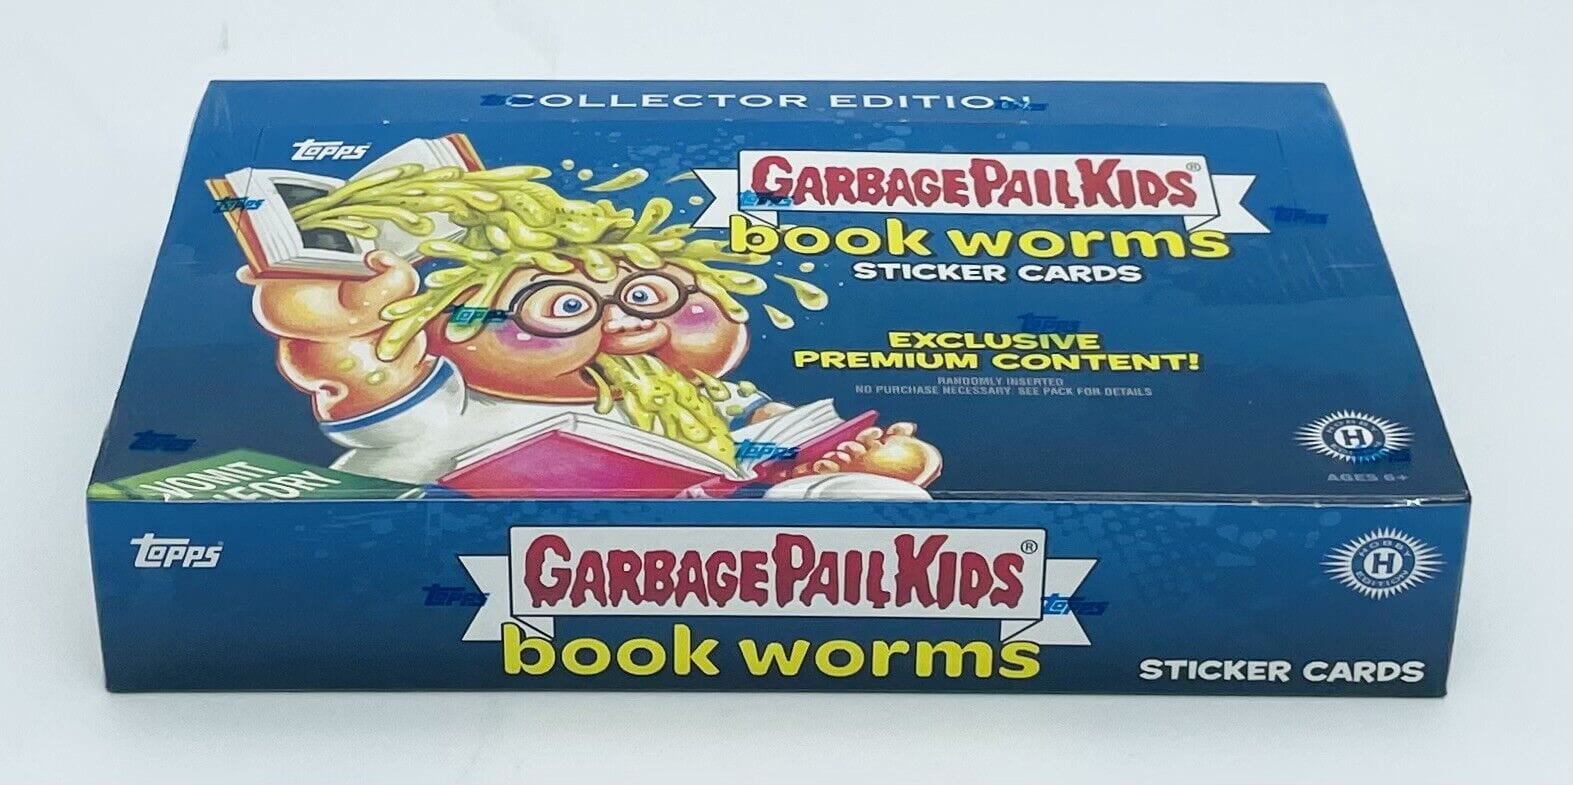 Topps: Garbage Pail Kids Book Worms - Sticker Card Booster Box, Collector Edition - Third Eye